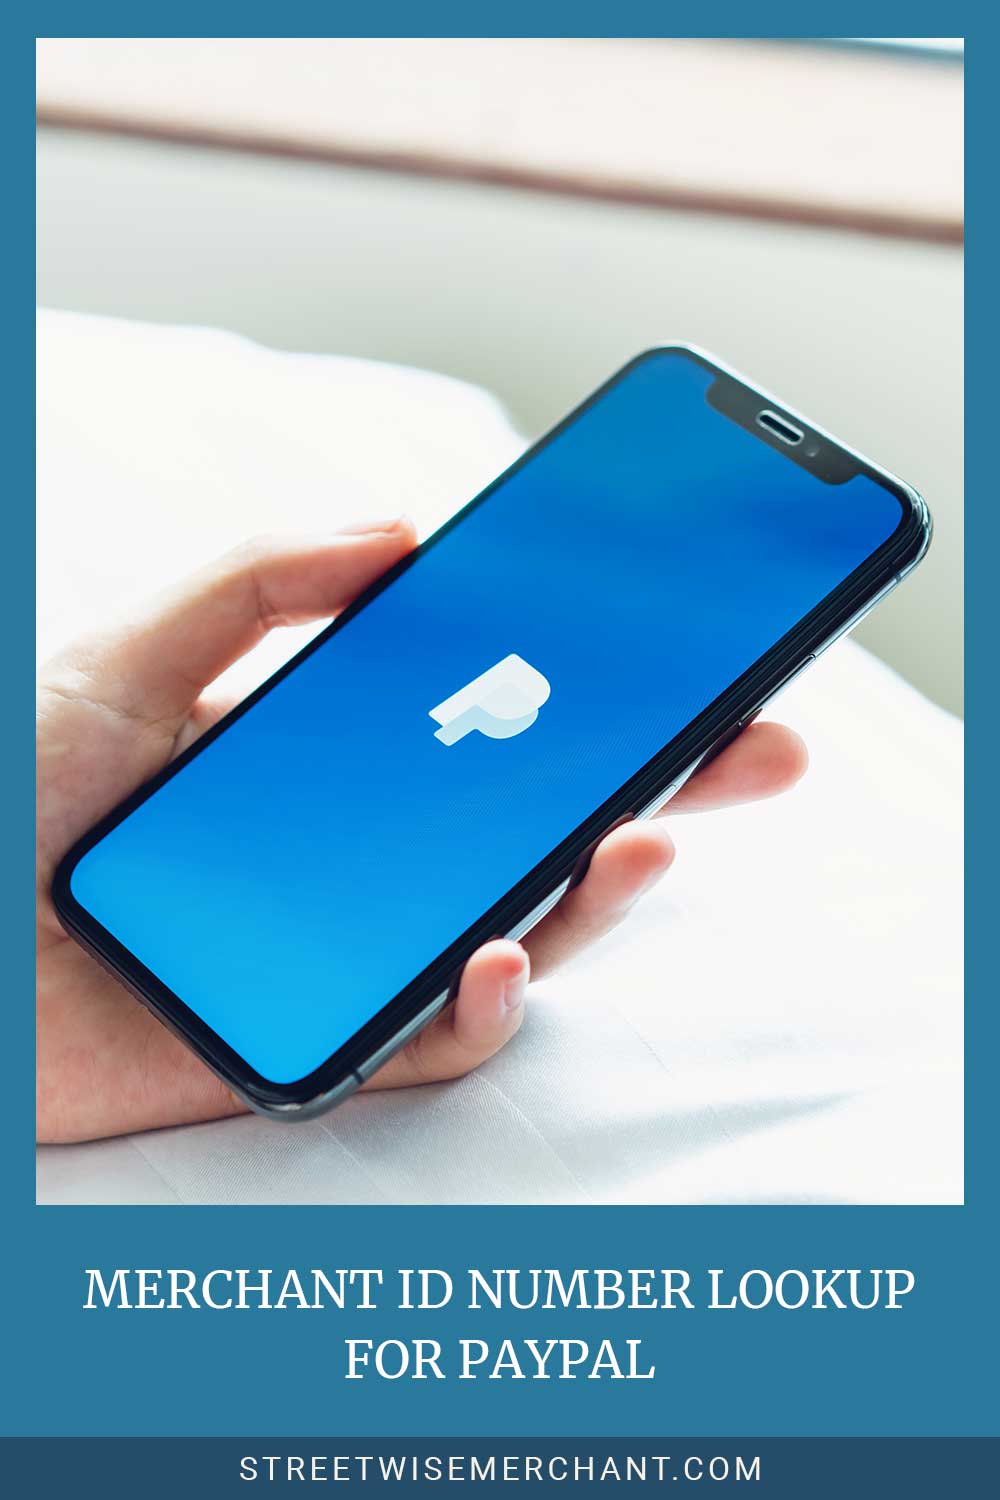 Hand holding a phone with PayPal logo on the screen - Merchant ID Number Lookup For PayPal